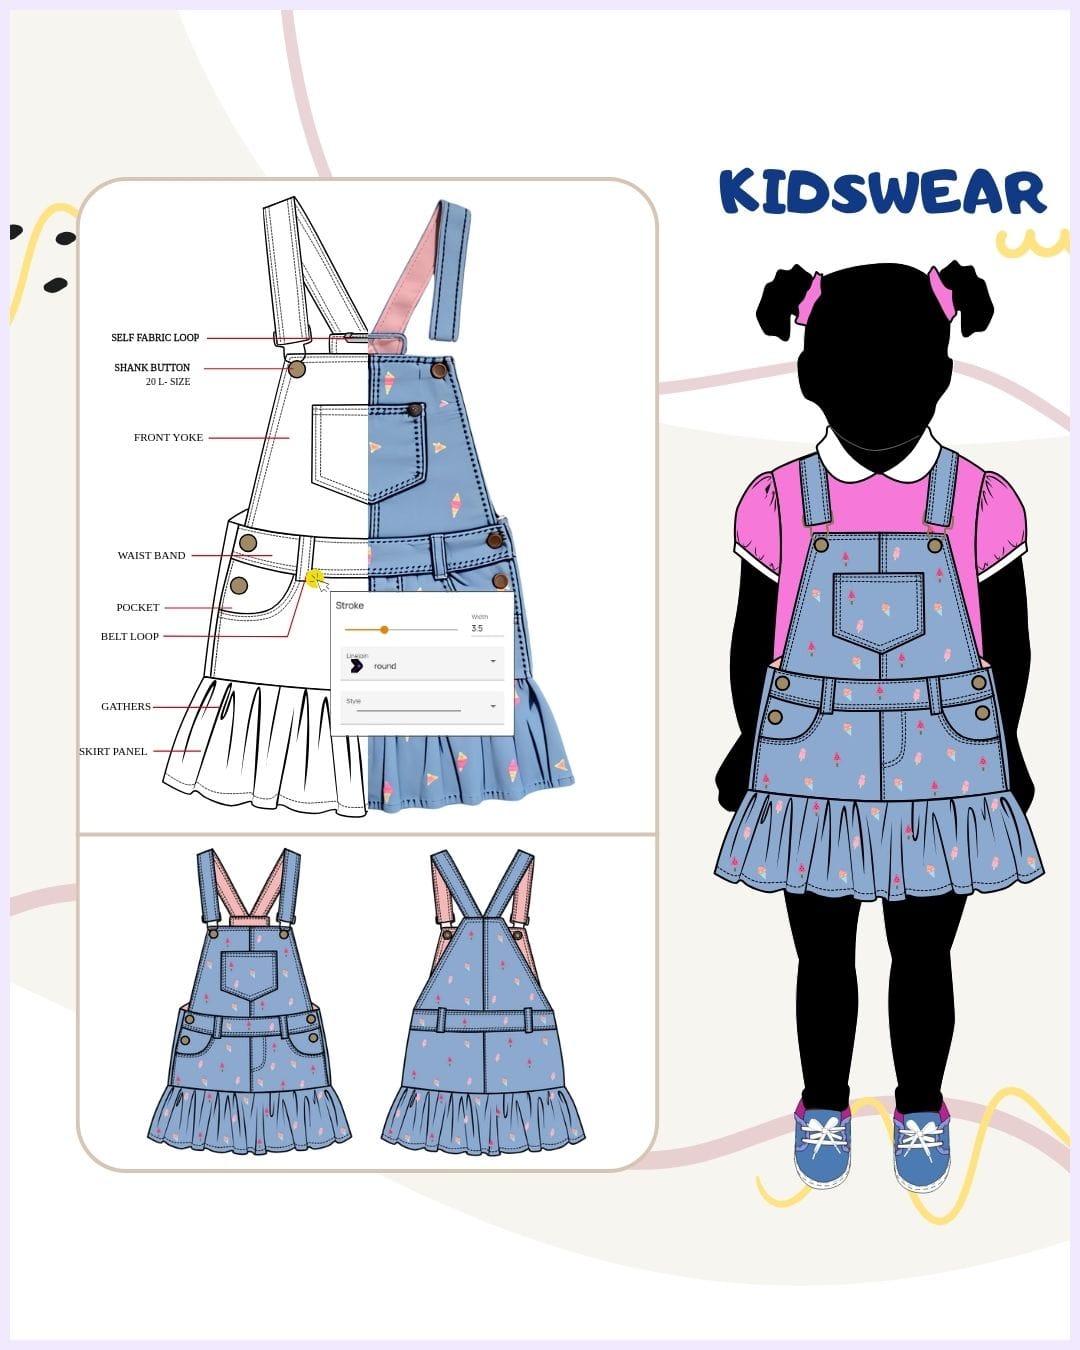 10 Types of Kidswear Sketches & Illustrations